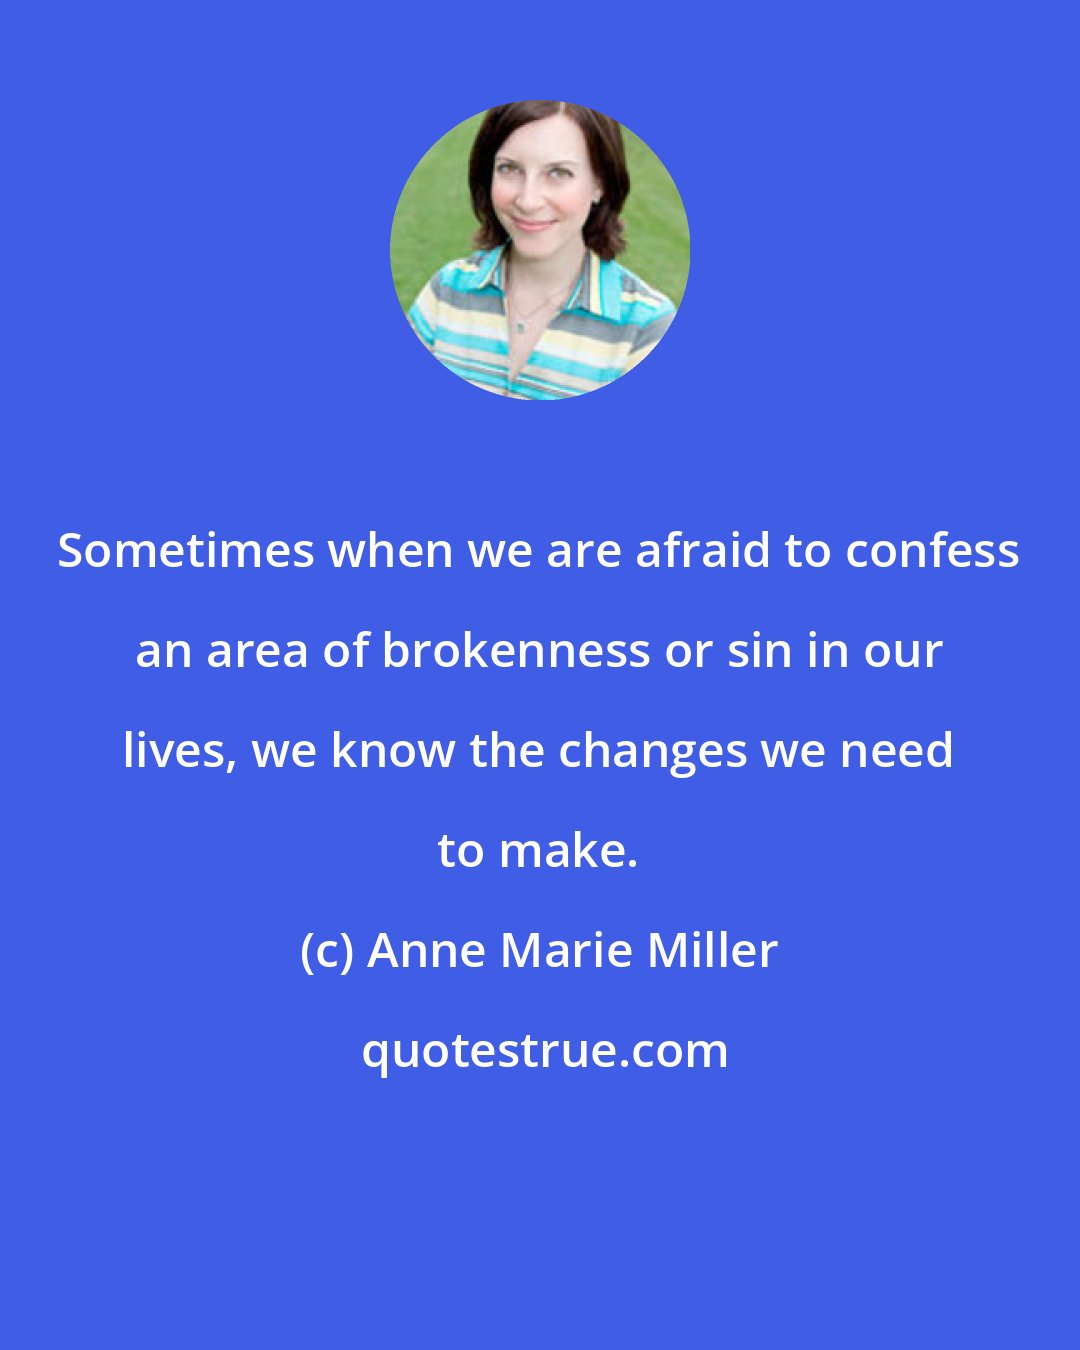 Anne Marie Miller: Sometimes when we are afraid to confess an area of brokenness or sin in our lives, we know the changes we need to make.